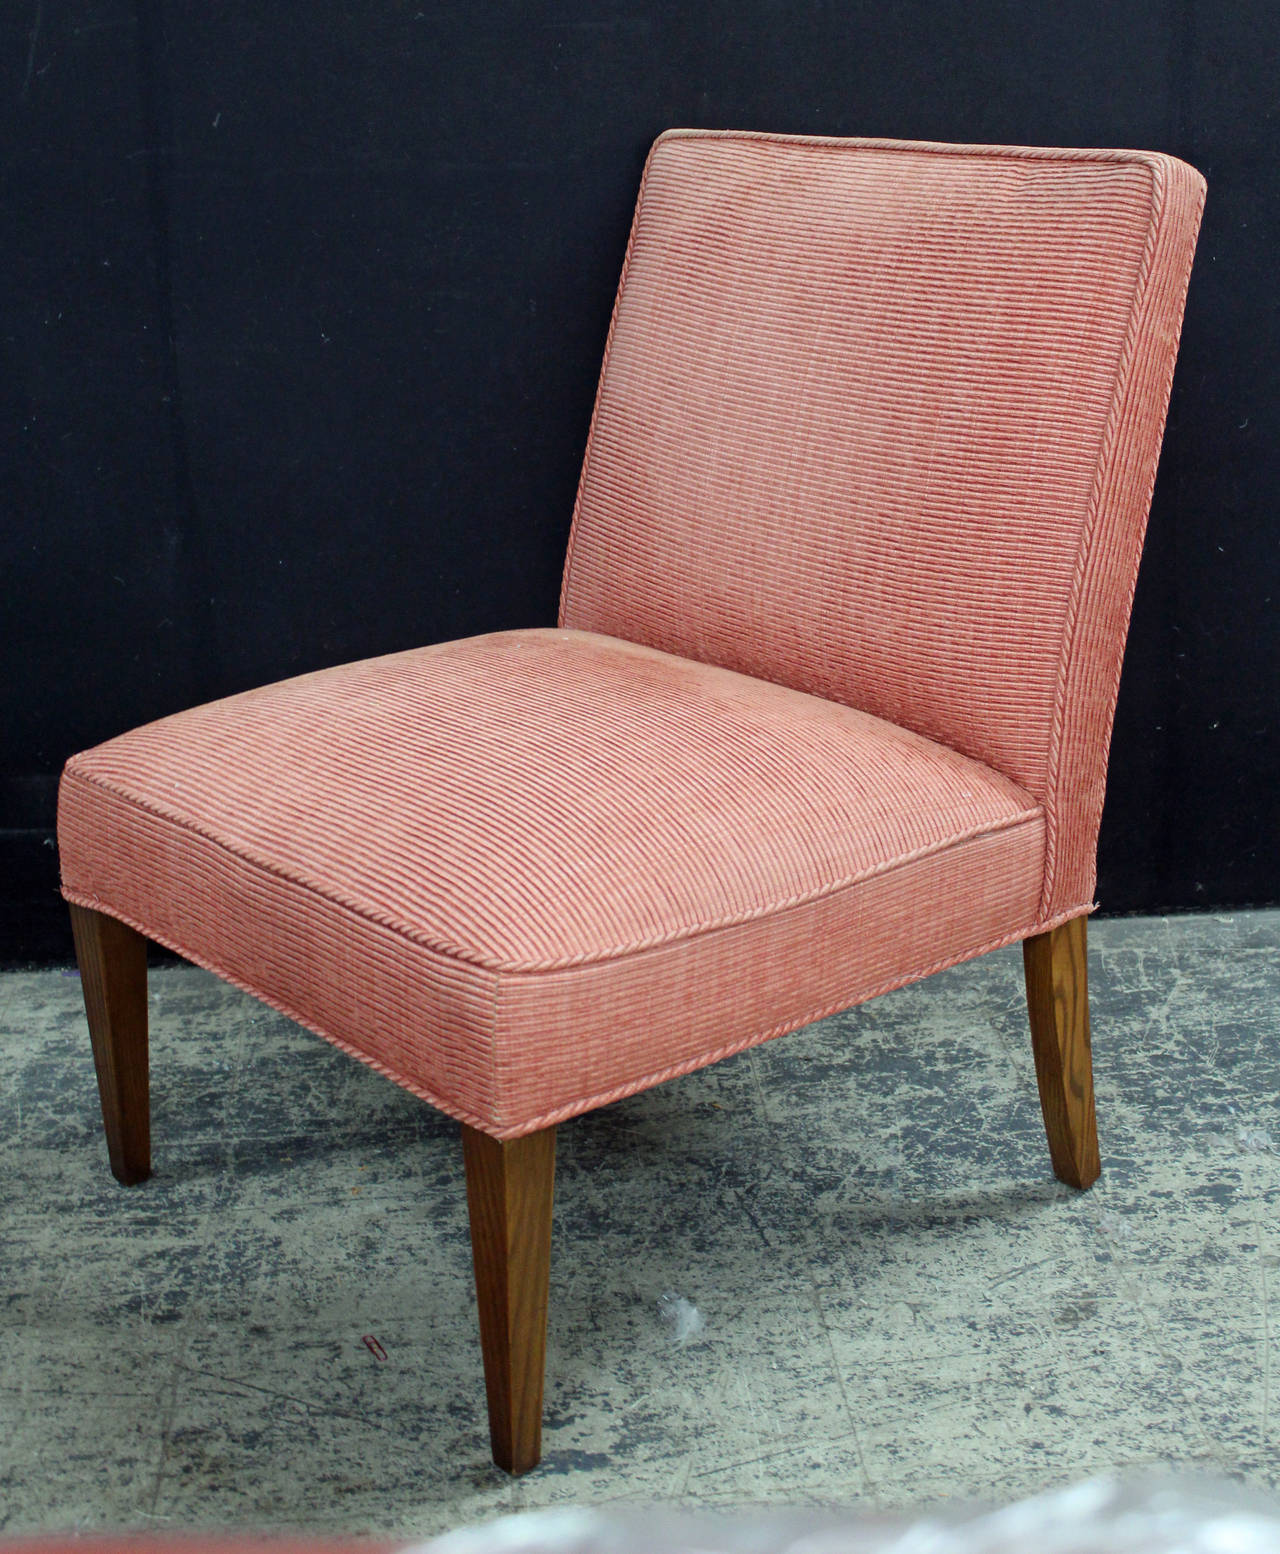 English Pair of Vintage Side Chairs in a Rose Corded Fabric For Sale